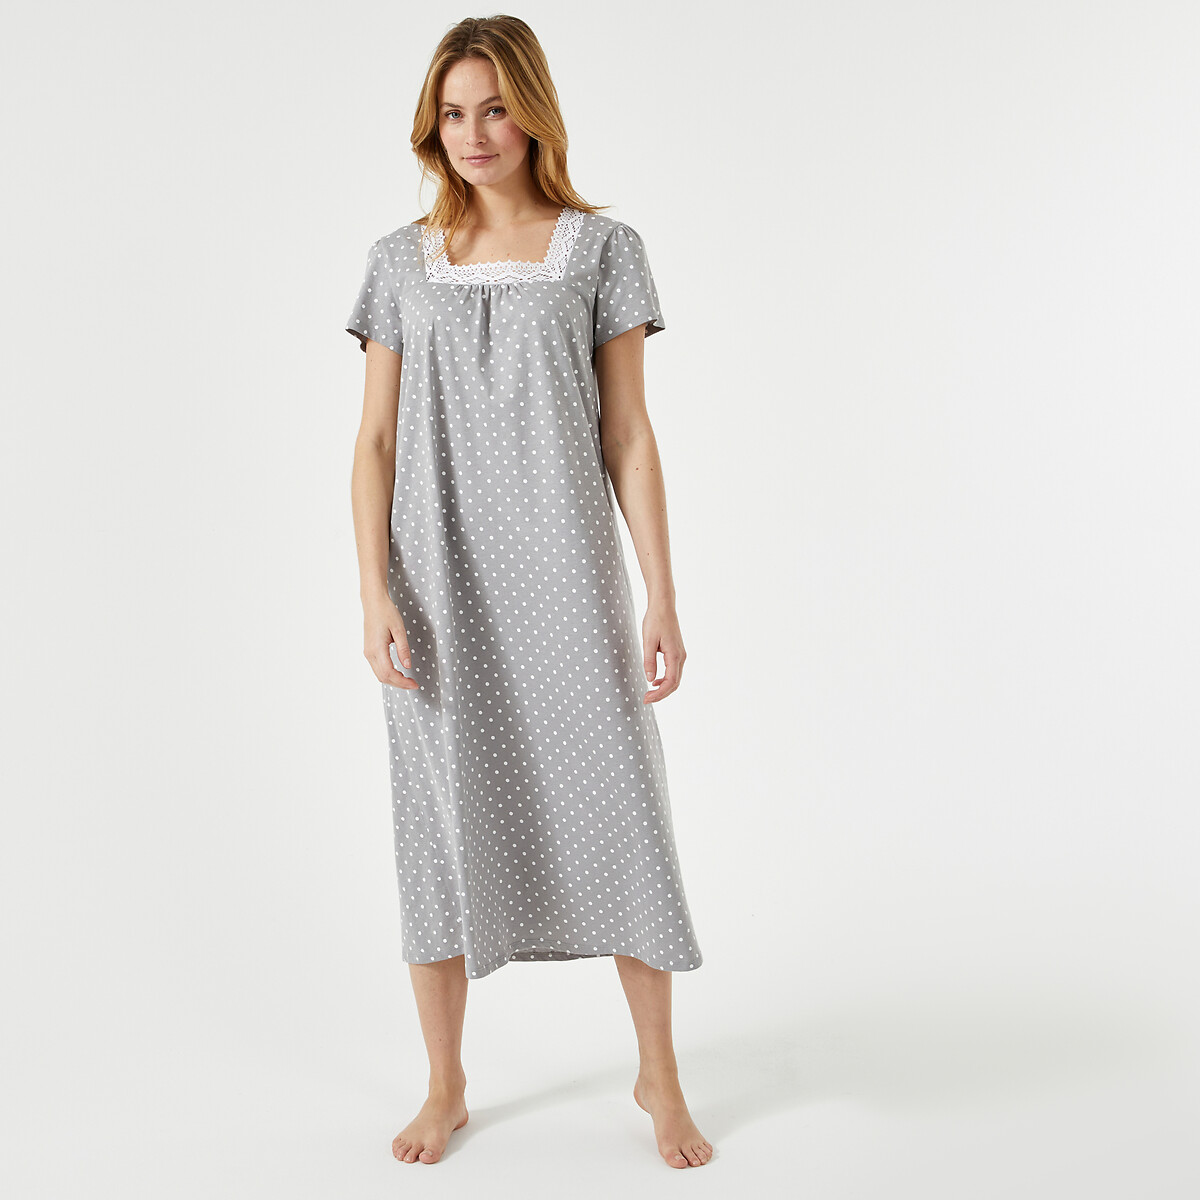 Polka Dot Long Nightdress in Cotton with Macrame Details